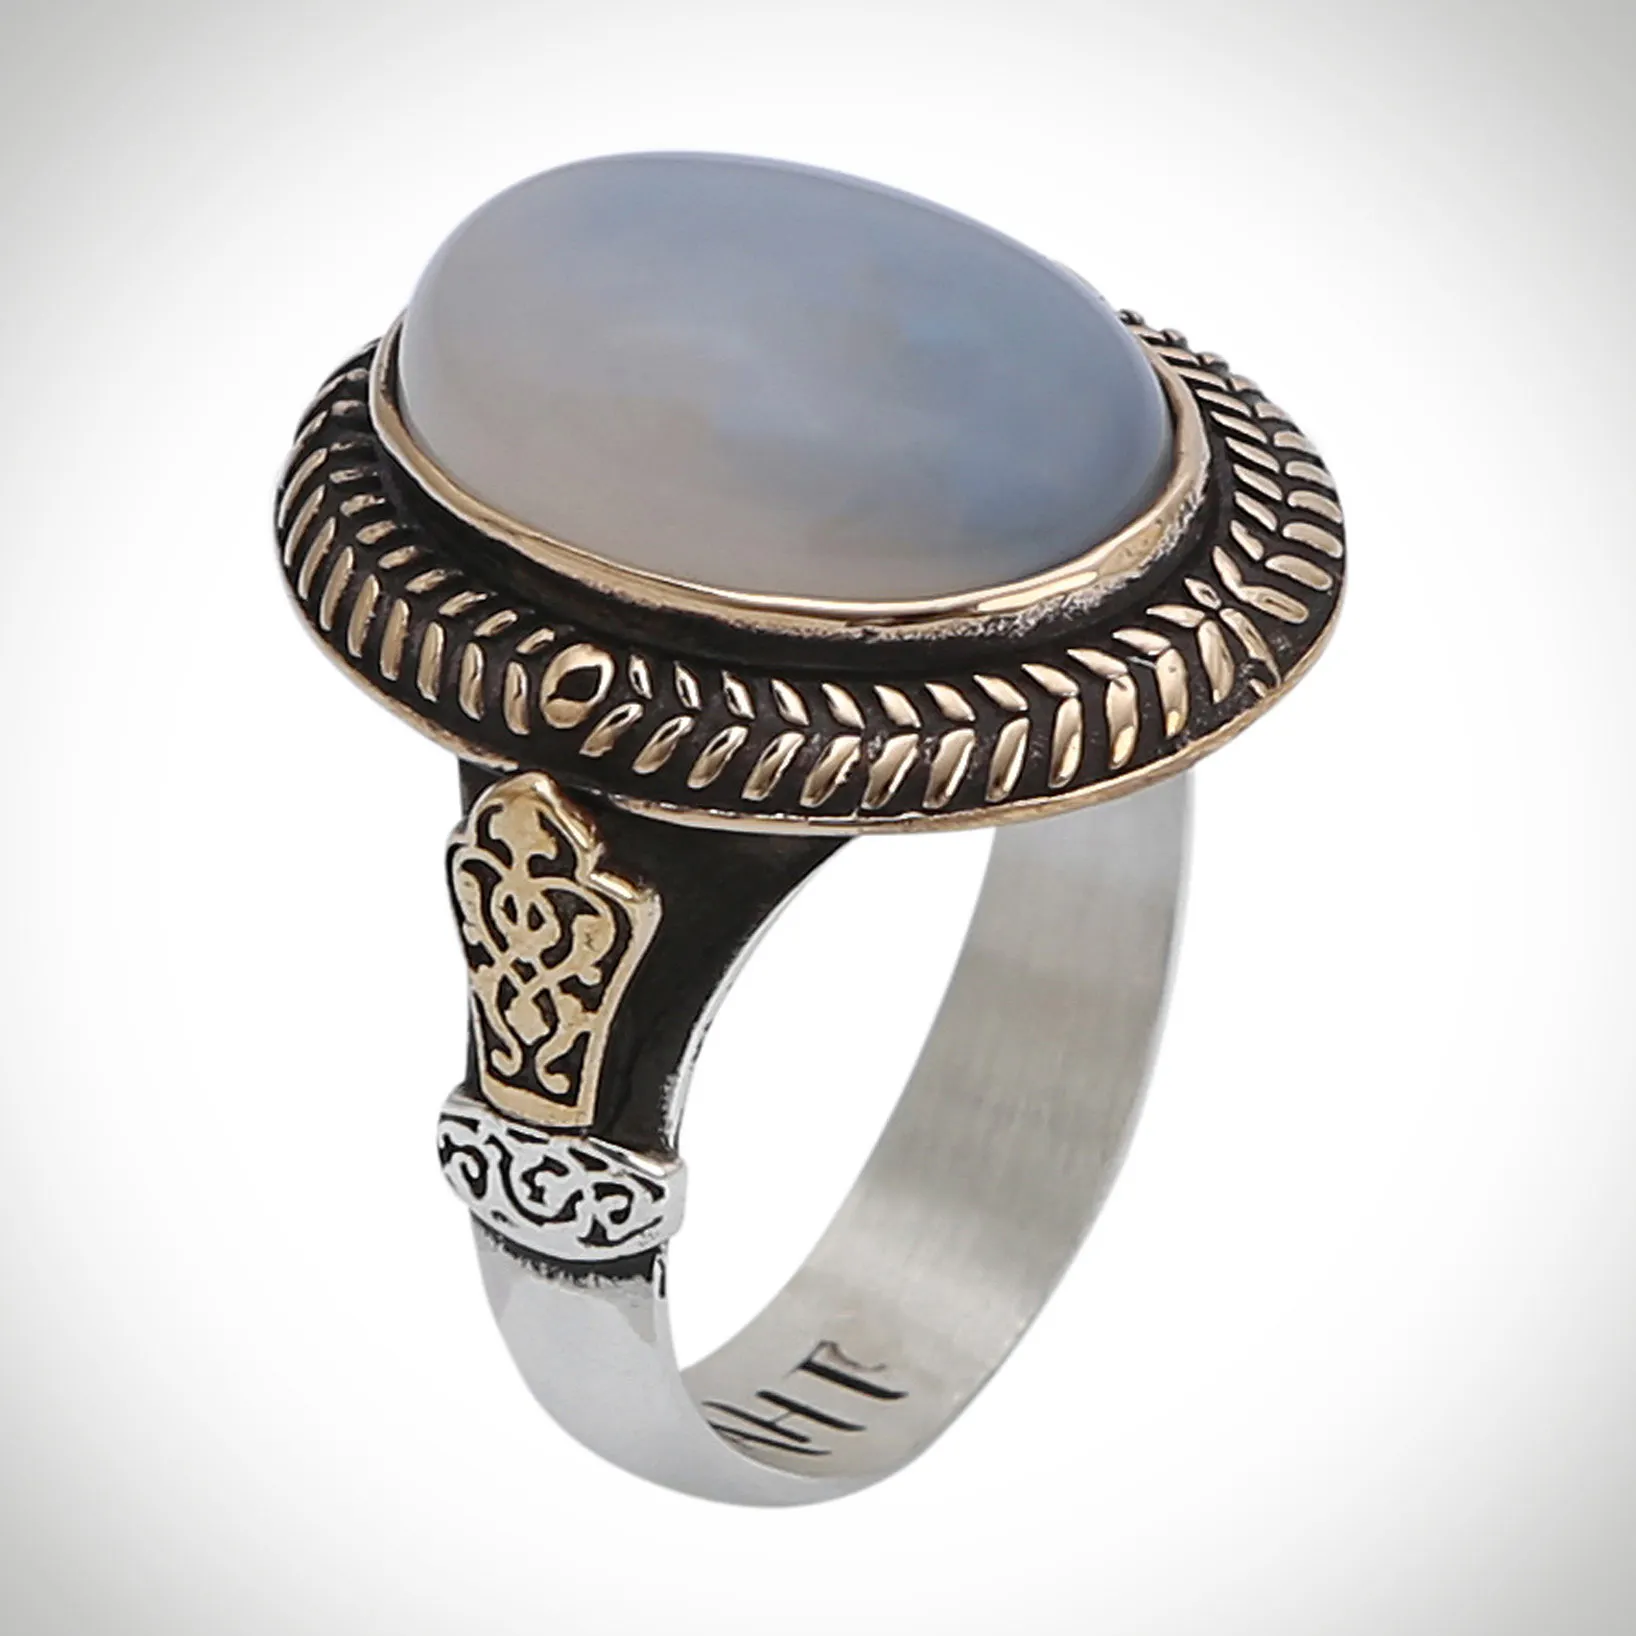 White Stone 925 Sterling Silver Rings Payitaht Sultan Abdulhamid Series For Men Vintage Jewelry Gothic Luxury Aesthetic Fidget